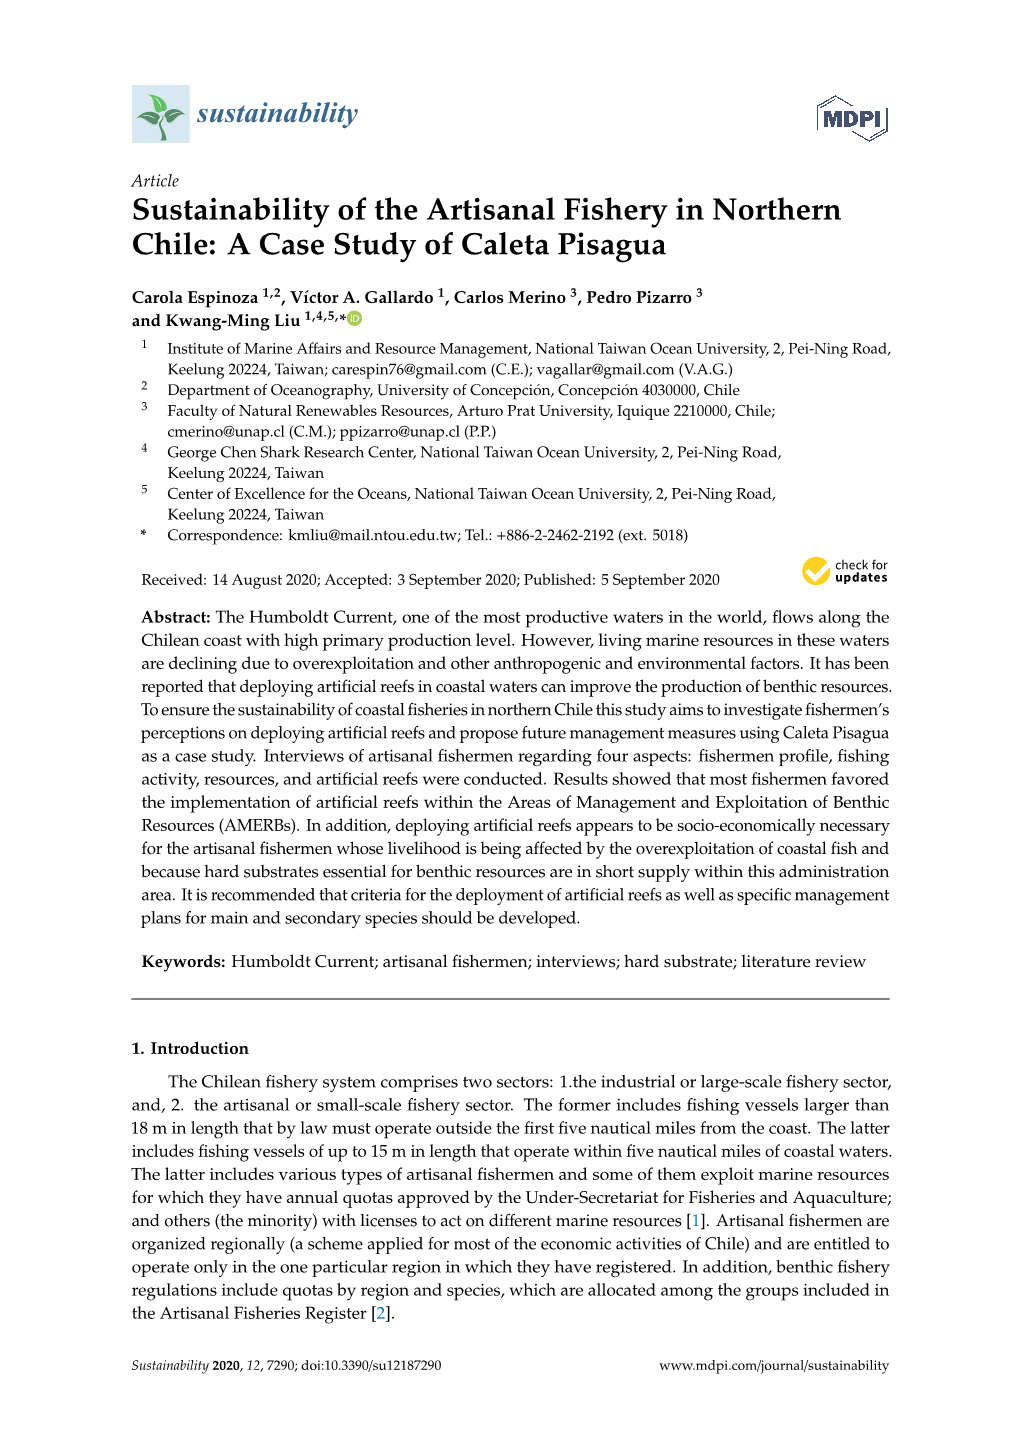 Sustainability of the Artisanal Fishery in Northern Chile: a Case Study of Caleta Pisagua